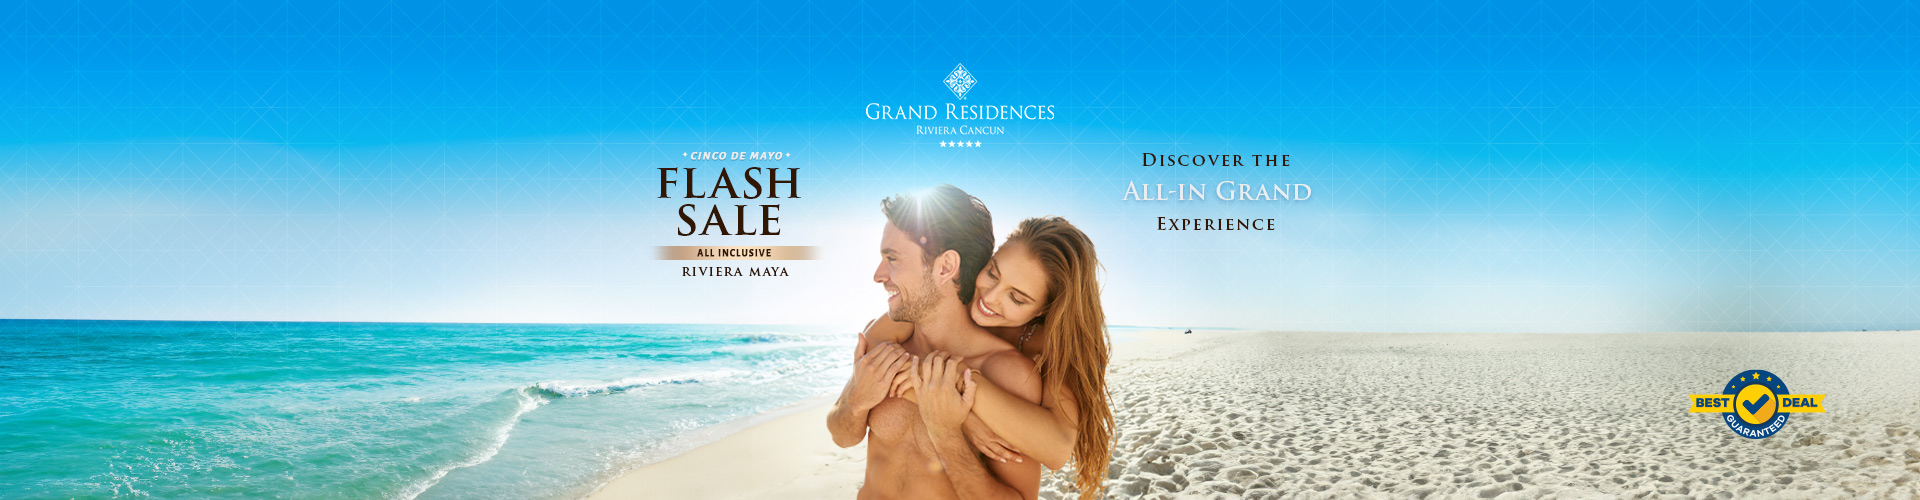 Grand Residences Flash Sale | Royal Reservations